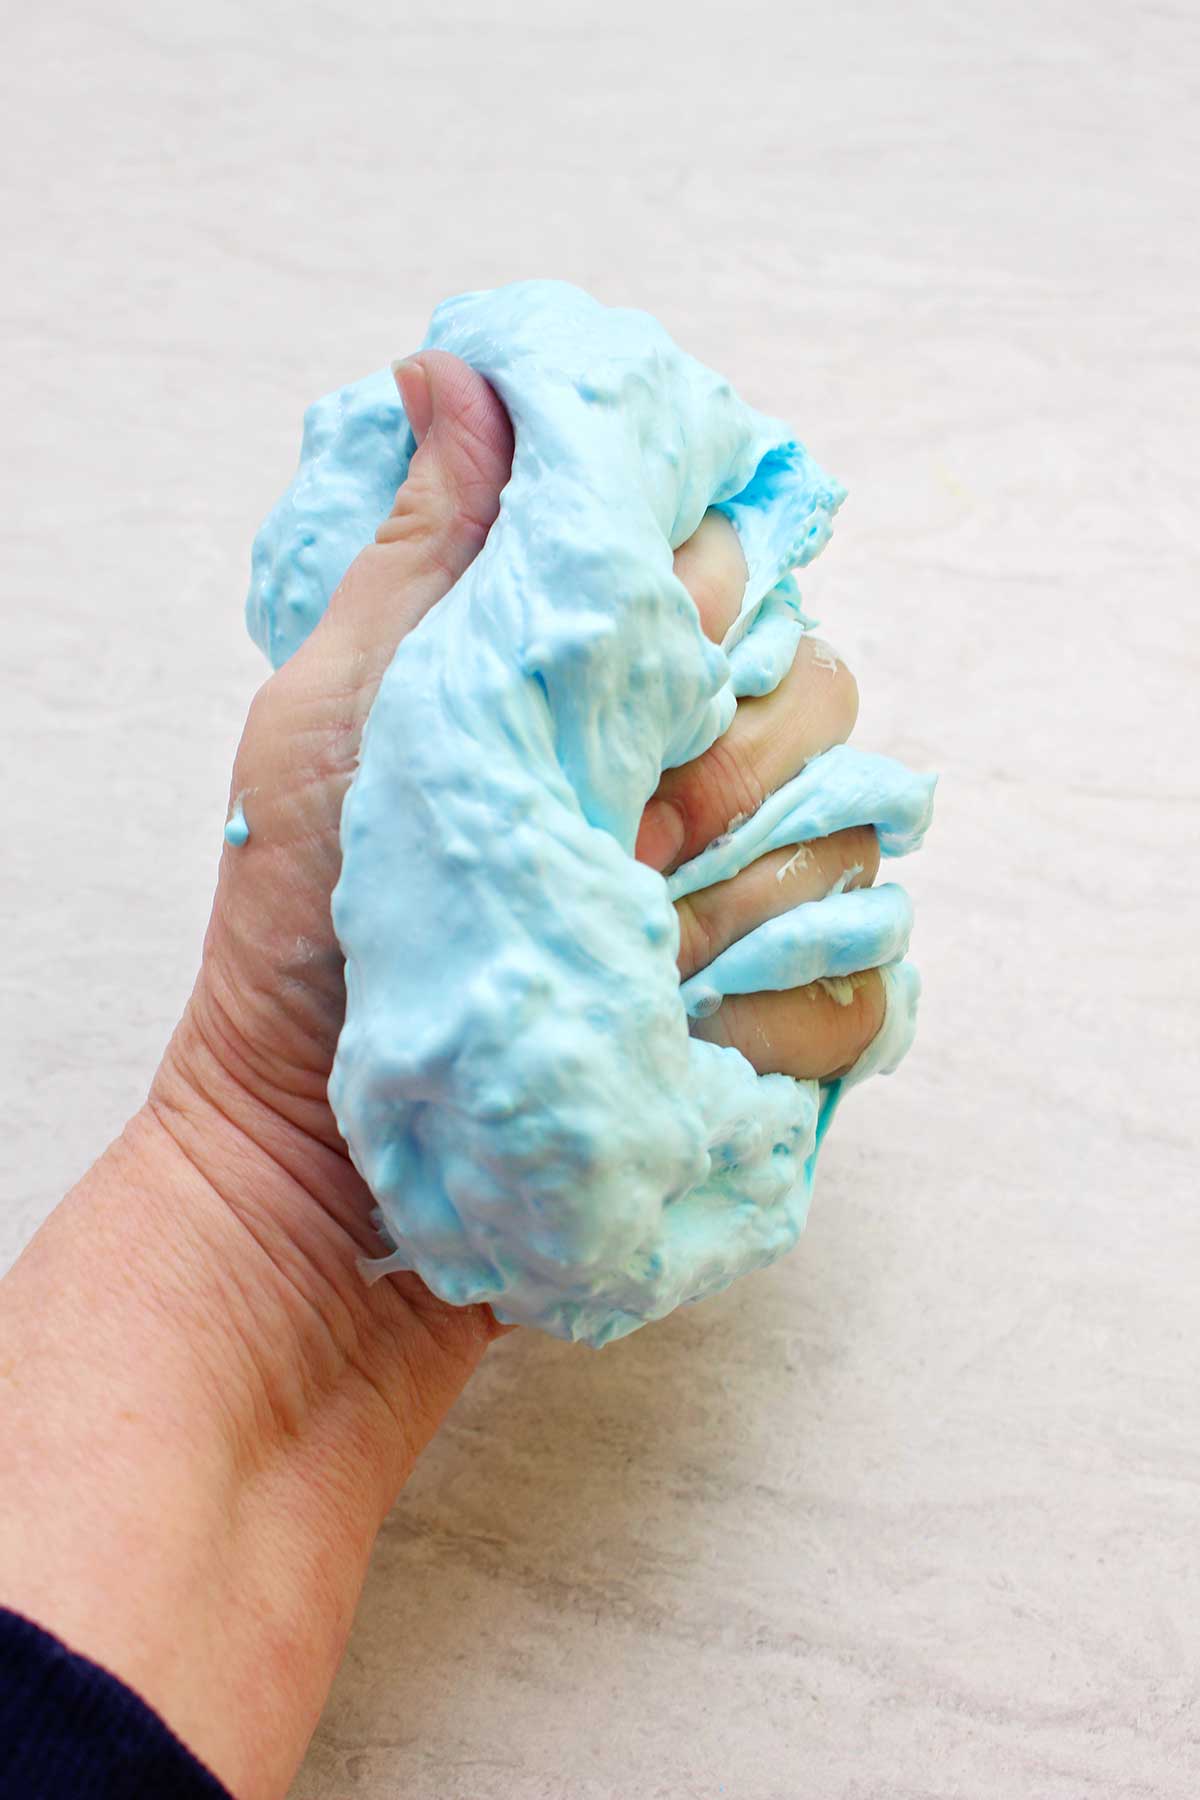 How to Make Fluffy Slime - 3 Ingredient Recipe with Shaving Cream